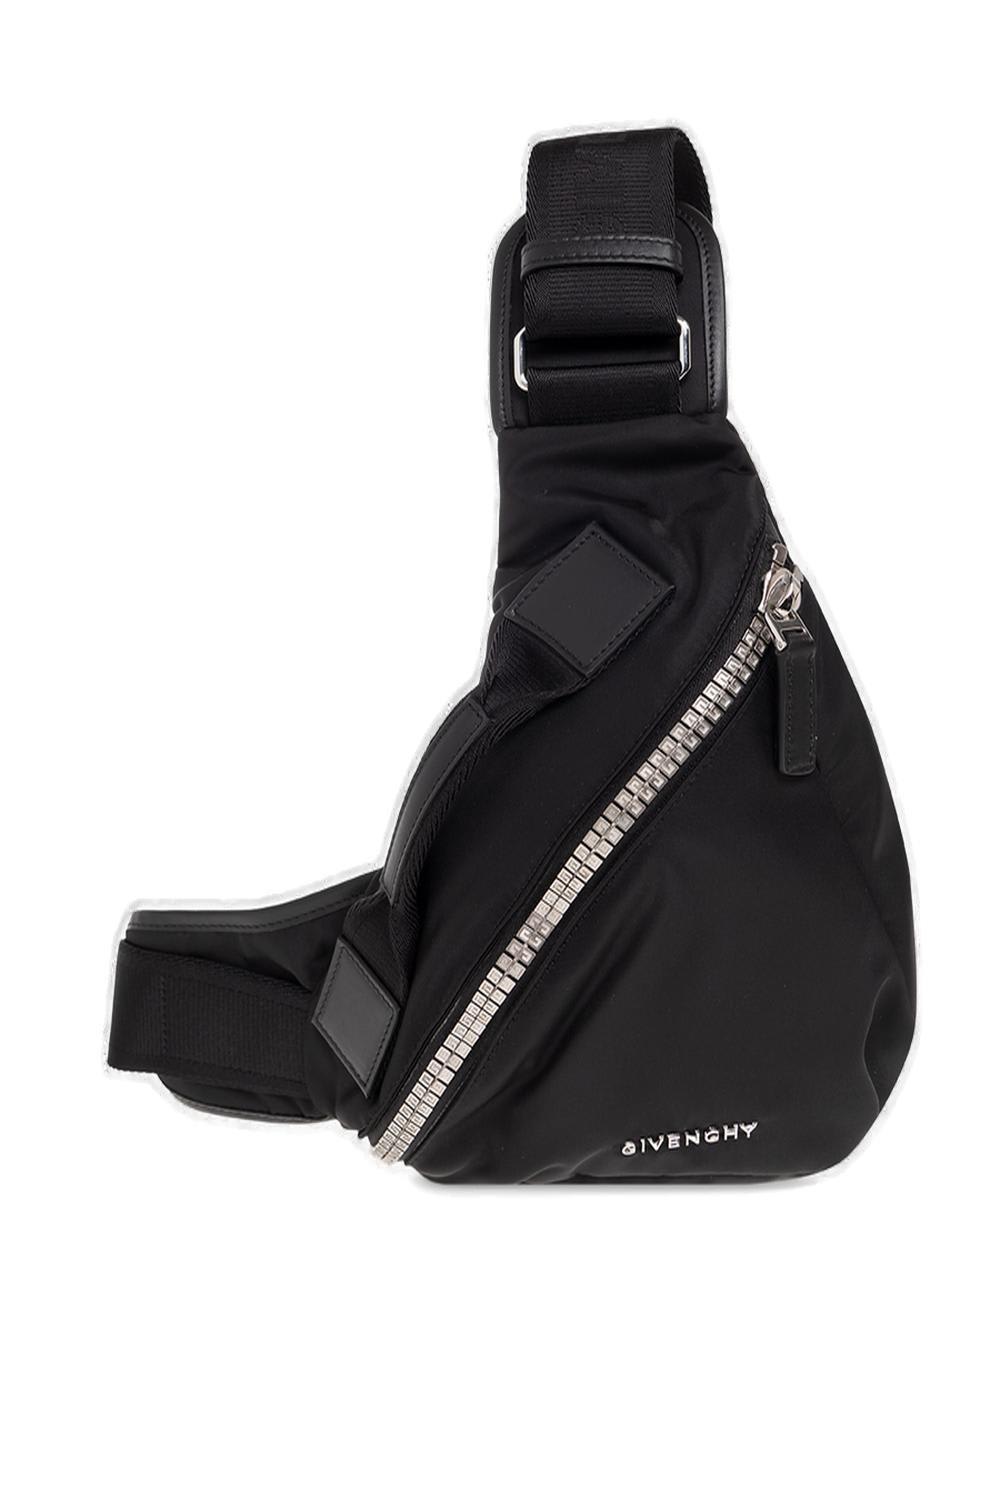 Givenchy Small G-zip Triangle Shoulder Bag